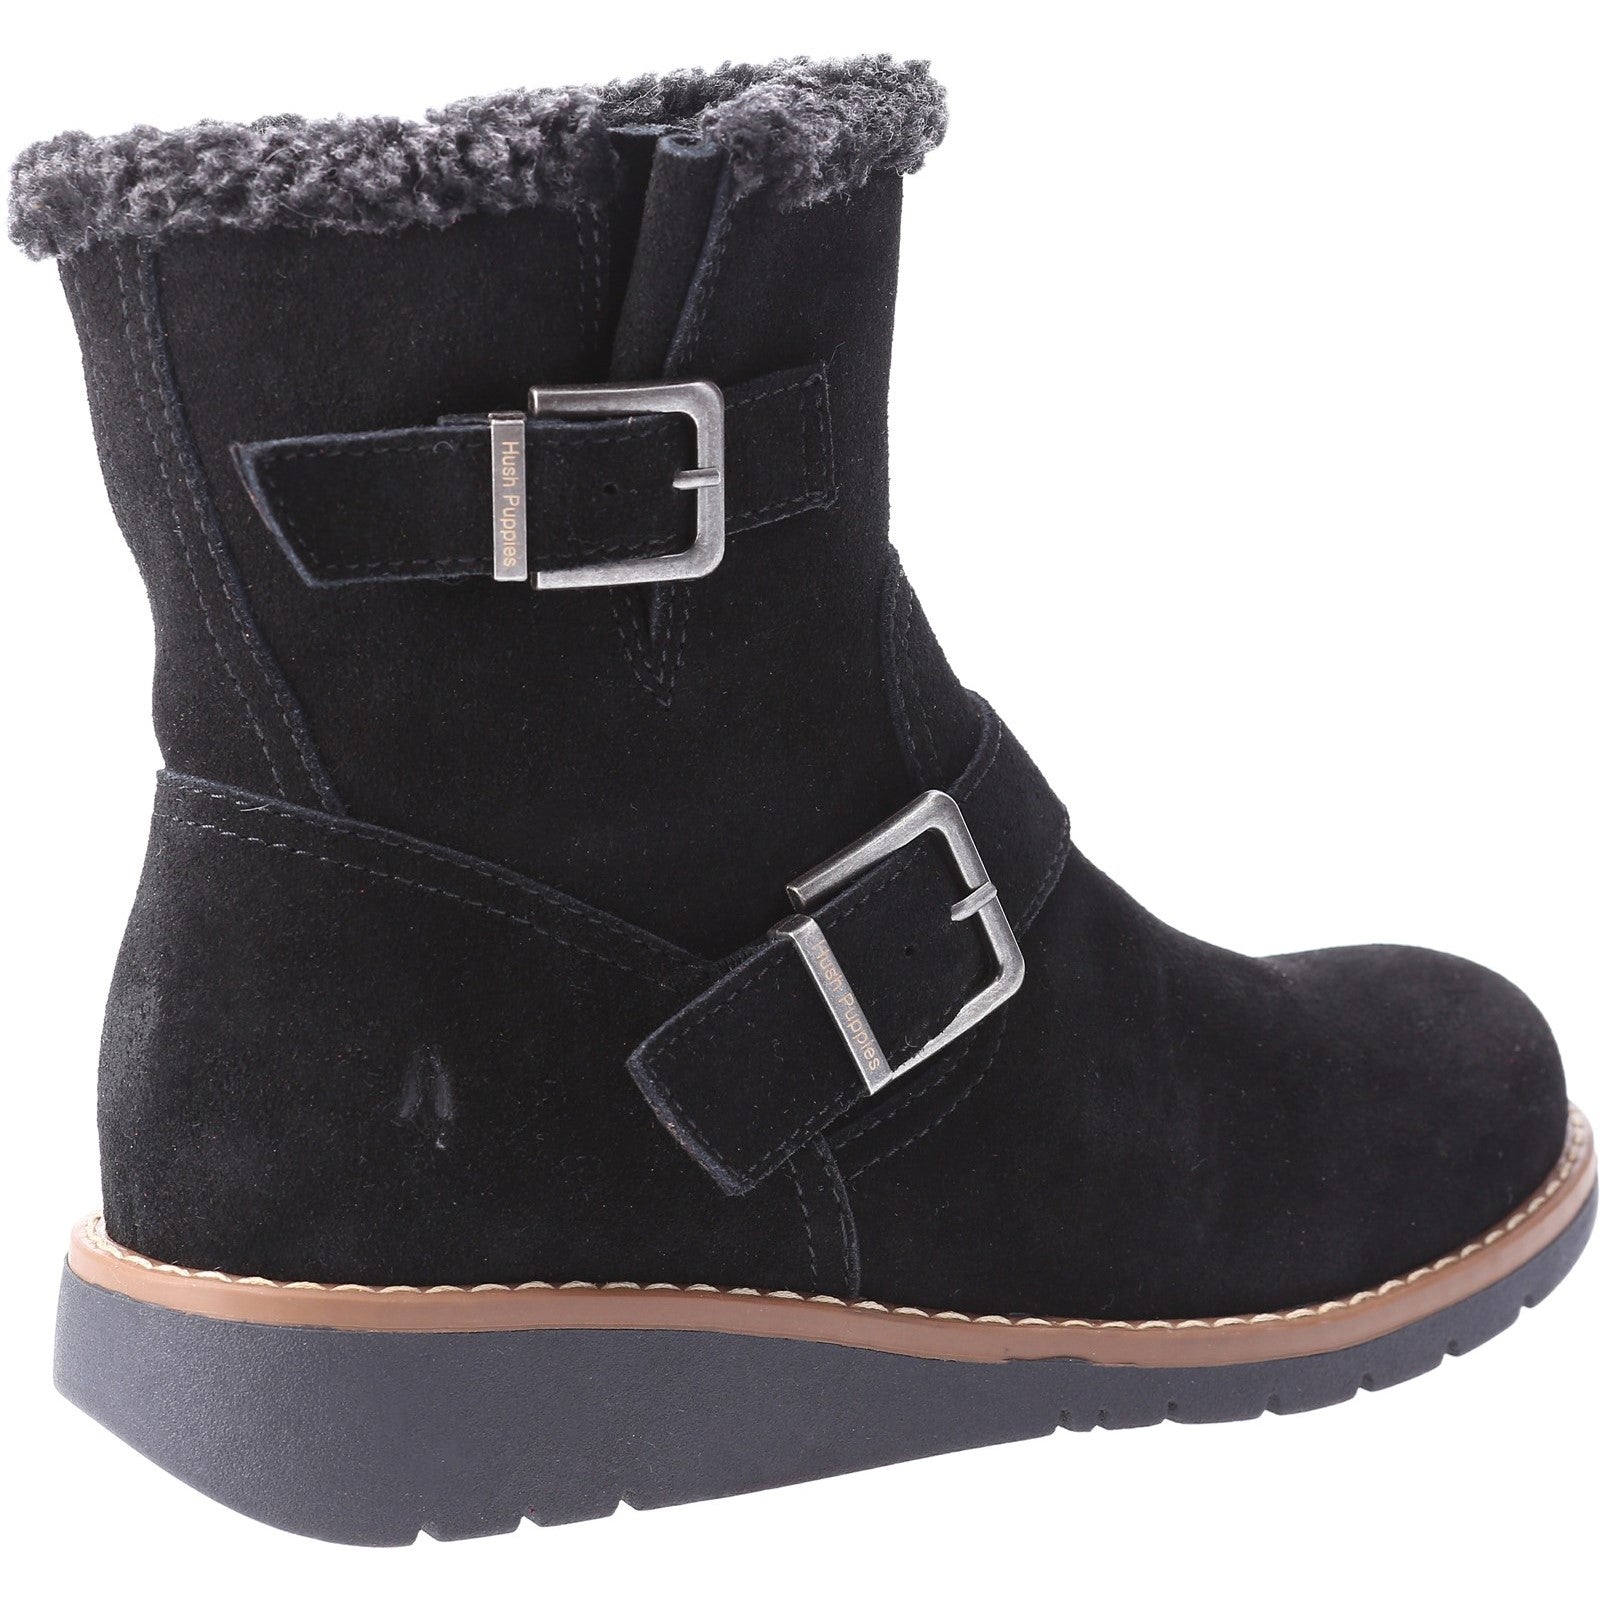 Hush Puppies Womens Lexie Suede Boot - Black